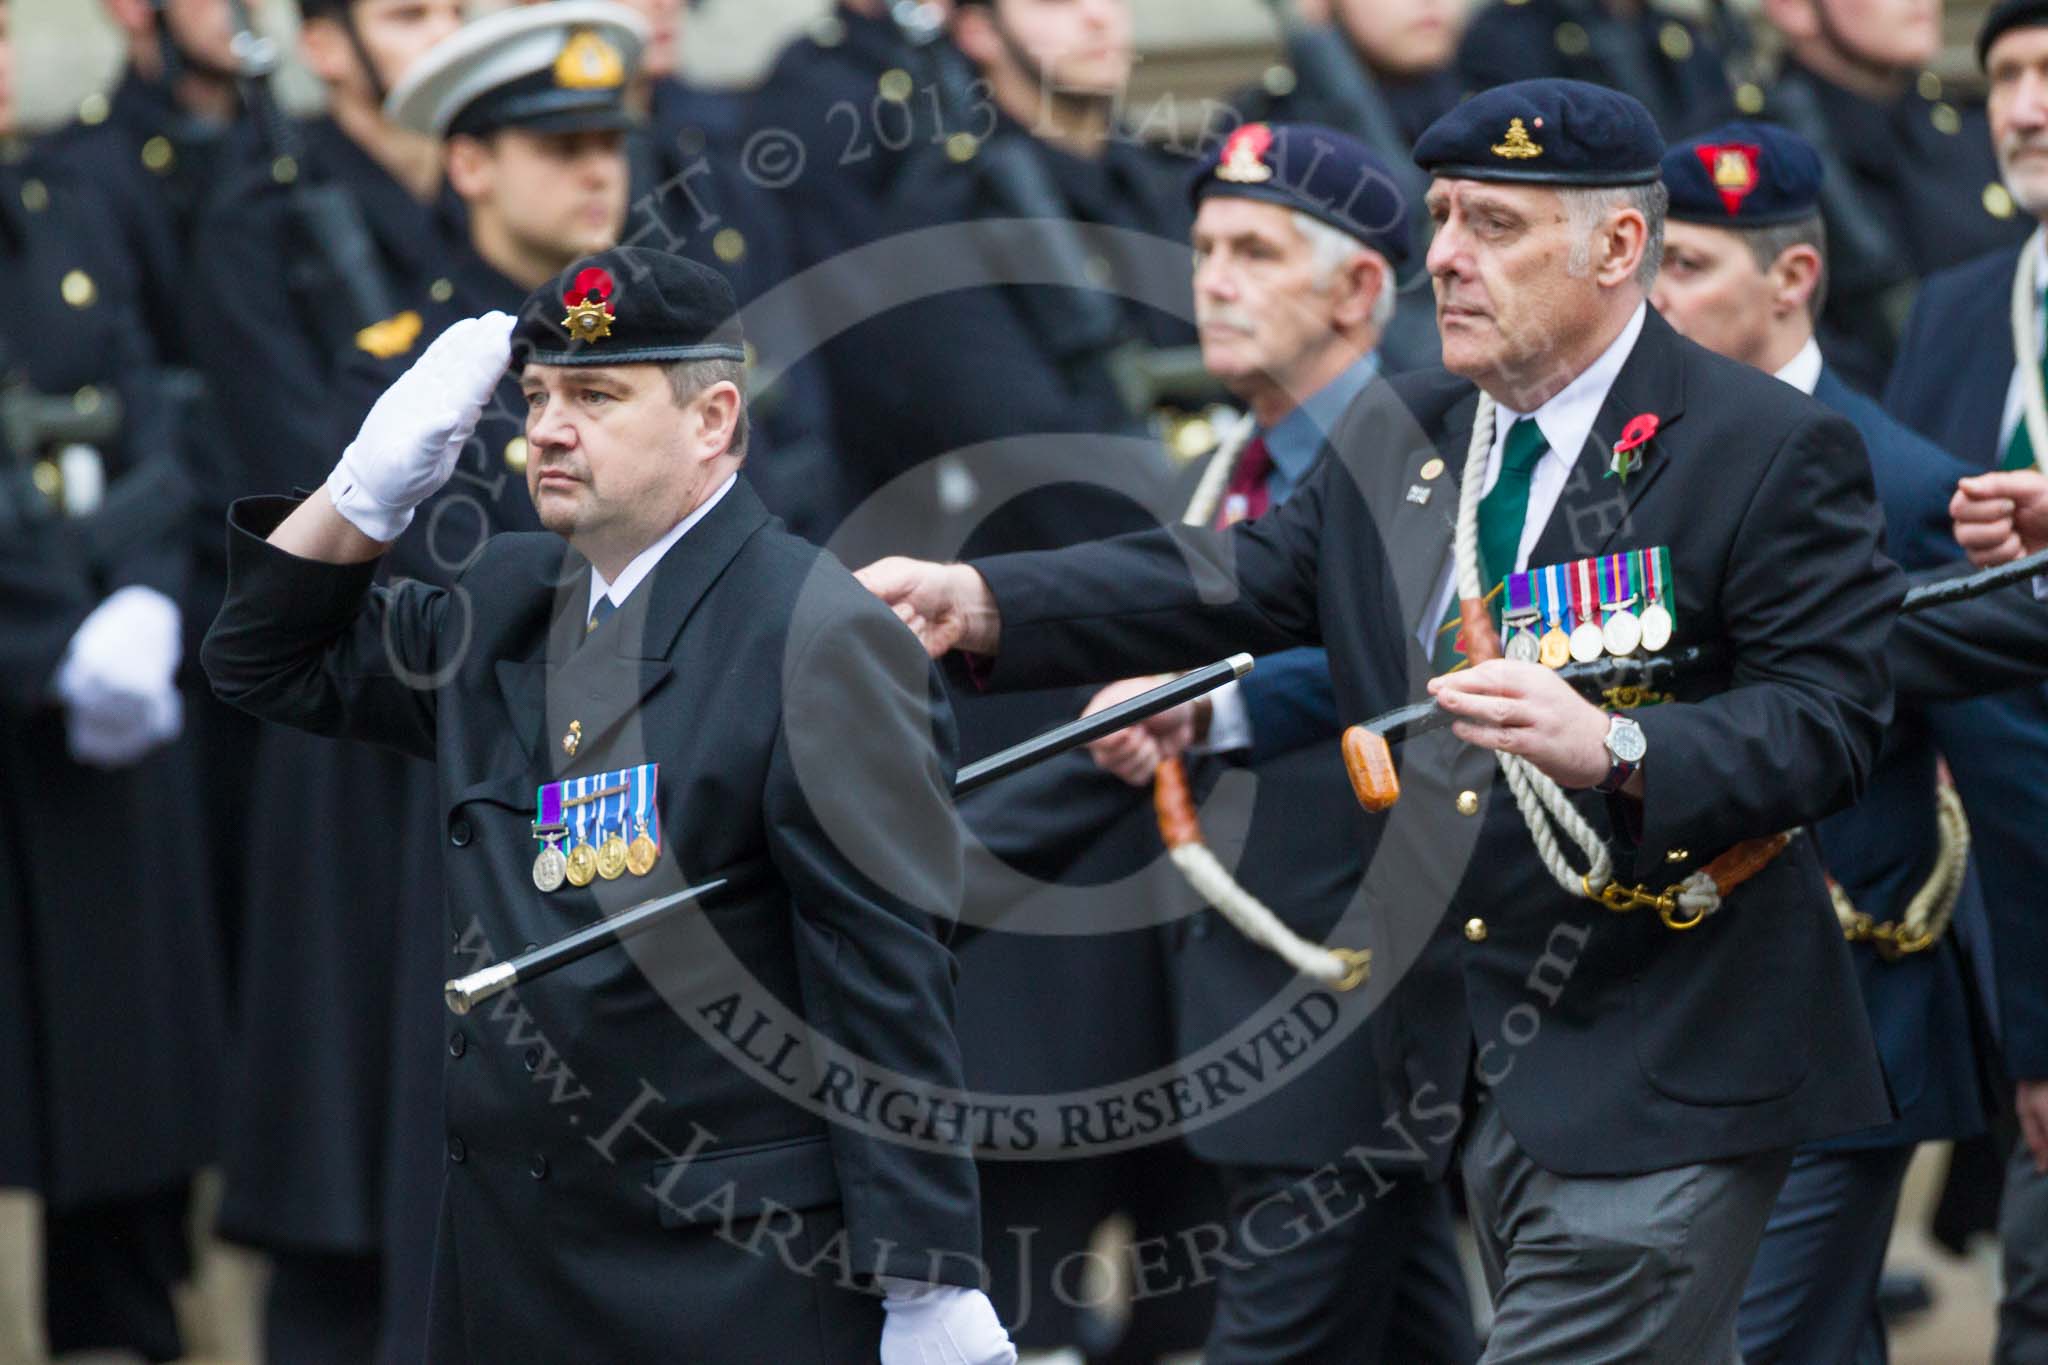 Remembrance Sunday at the Cenotaph 2015: Group D4, Army Dog Unit Northern Ireland Association.
Cenotaph, Whitehall, London SW1,
London,
Greater London,
United Kingdom,
on 08 November 2015 at 11:52, image #603